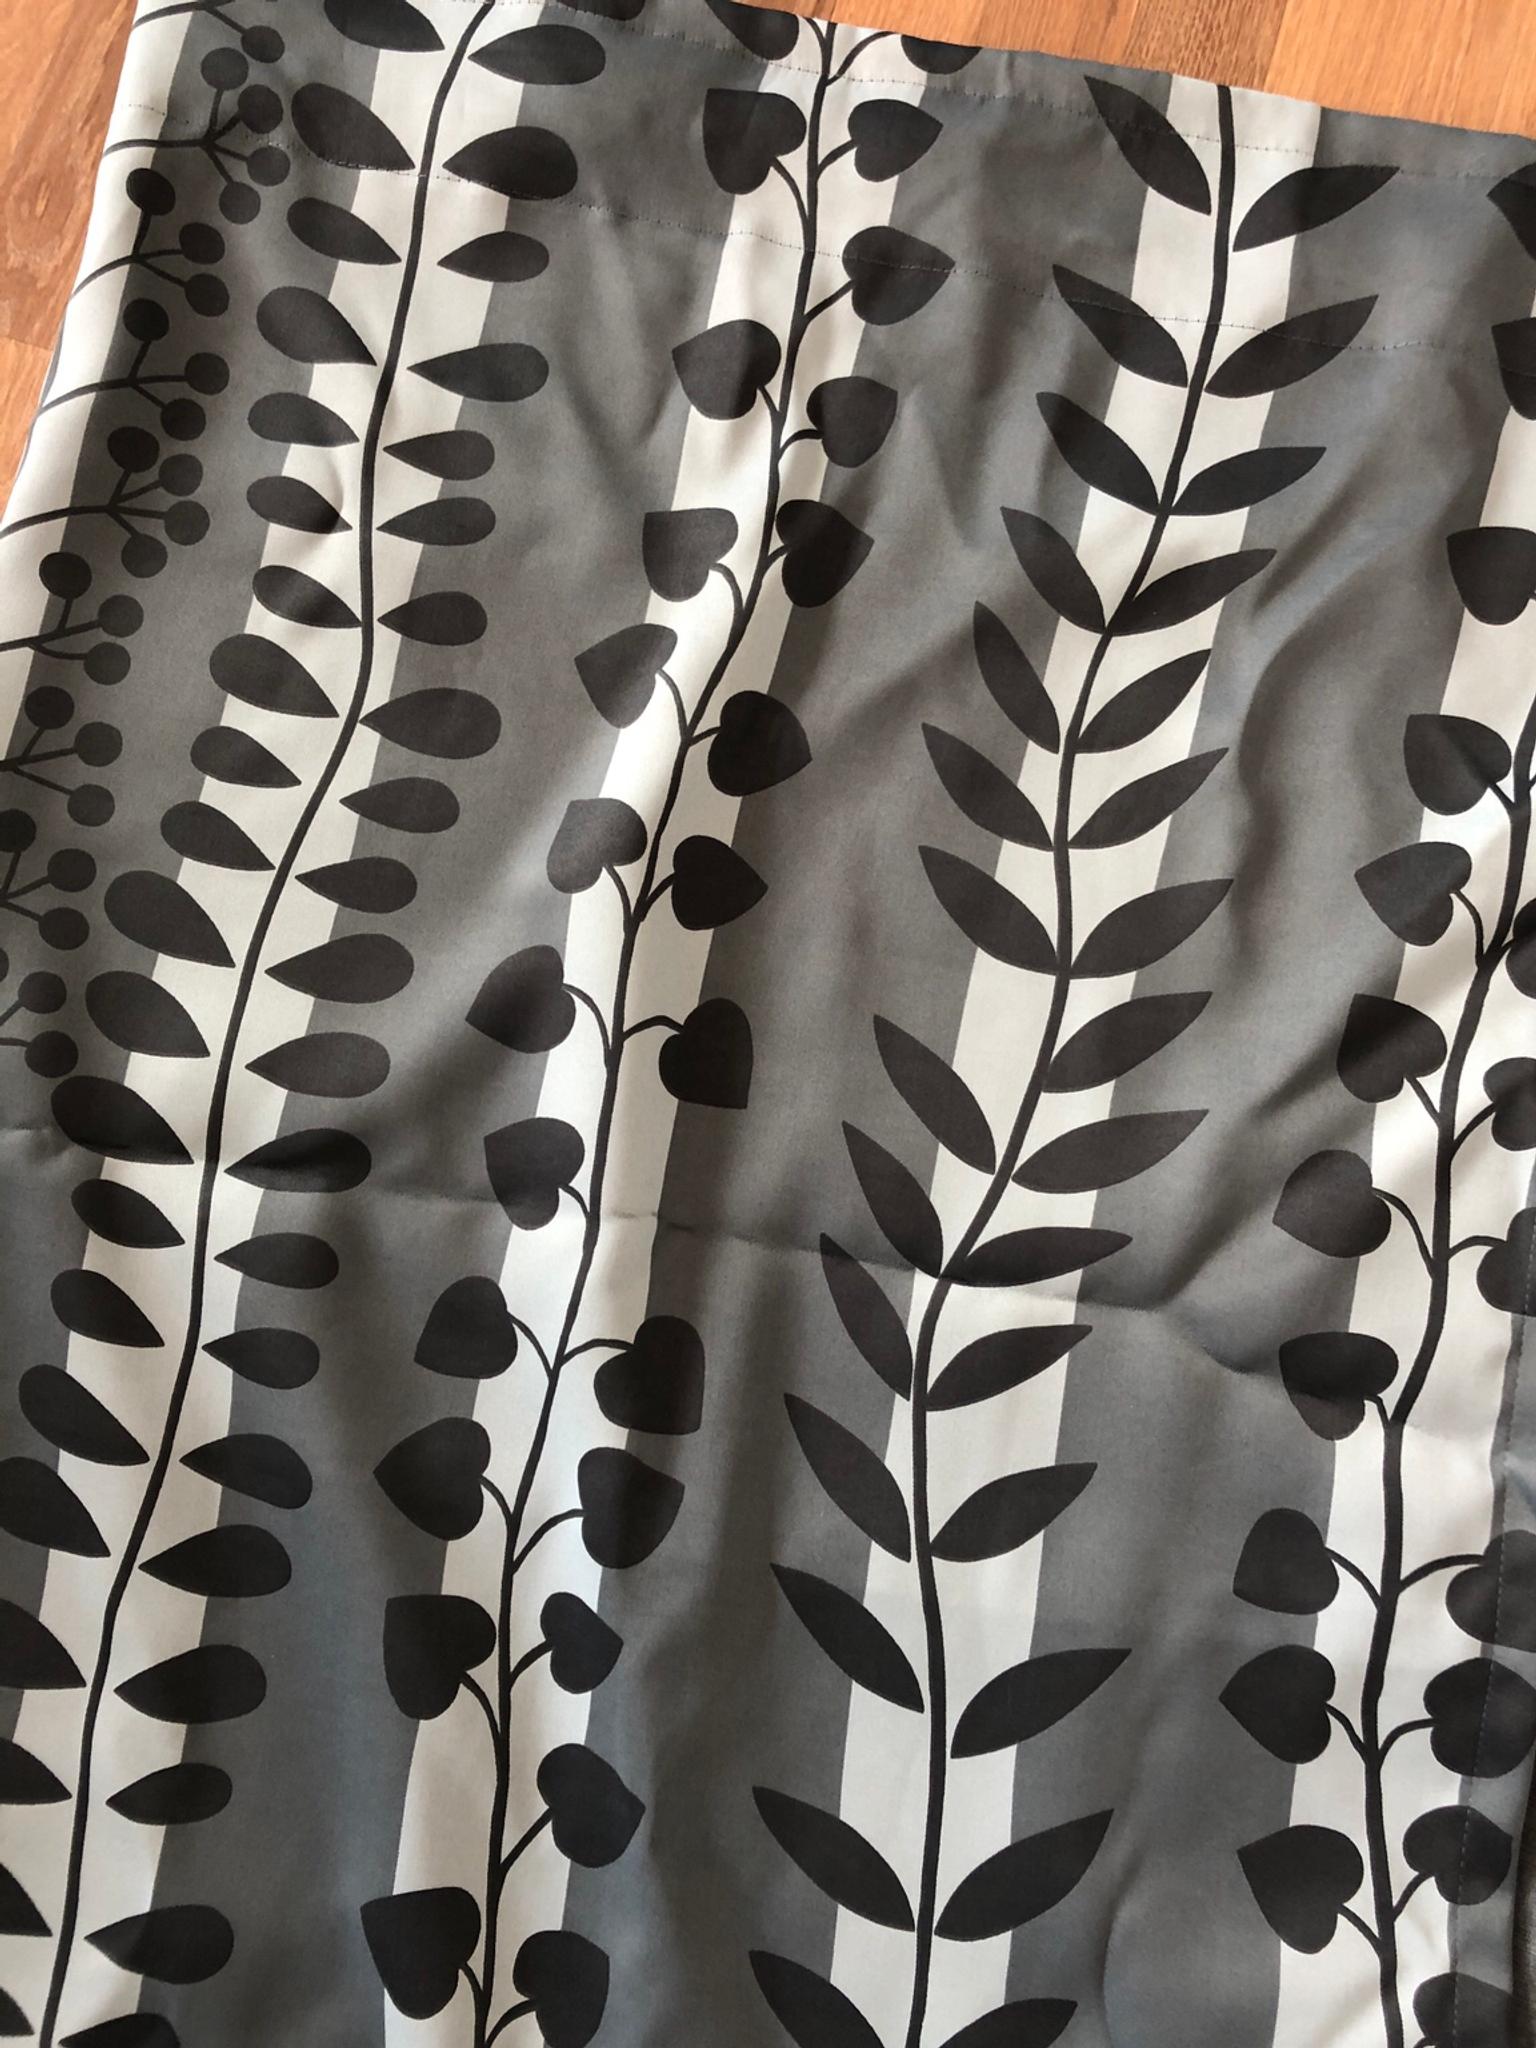 Ikea blackout curtains in W12 London for £15.00 for sale | Shpock